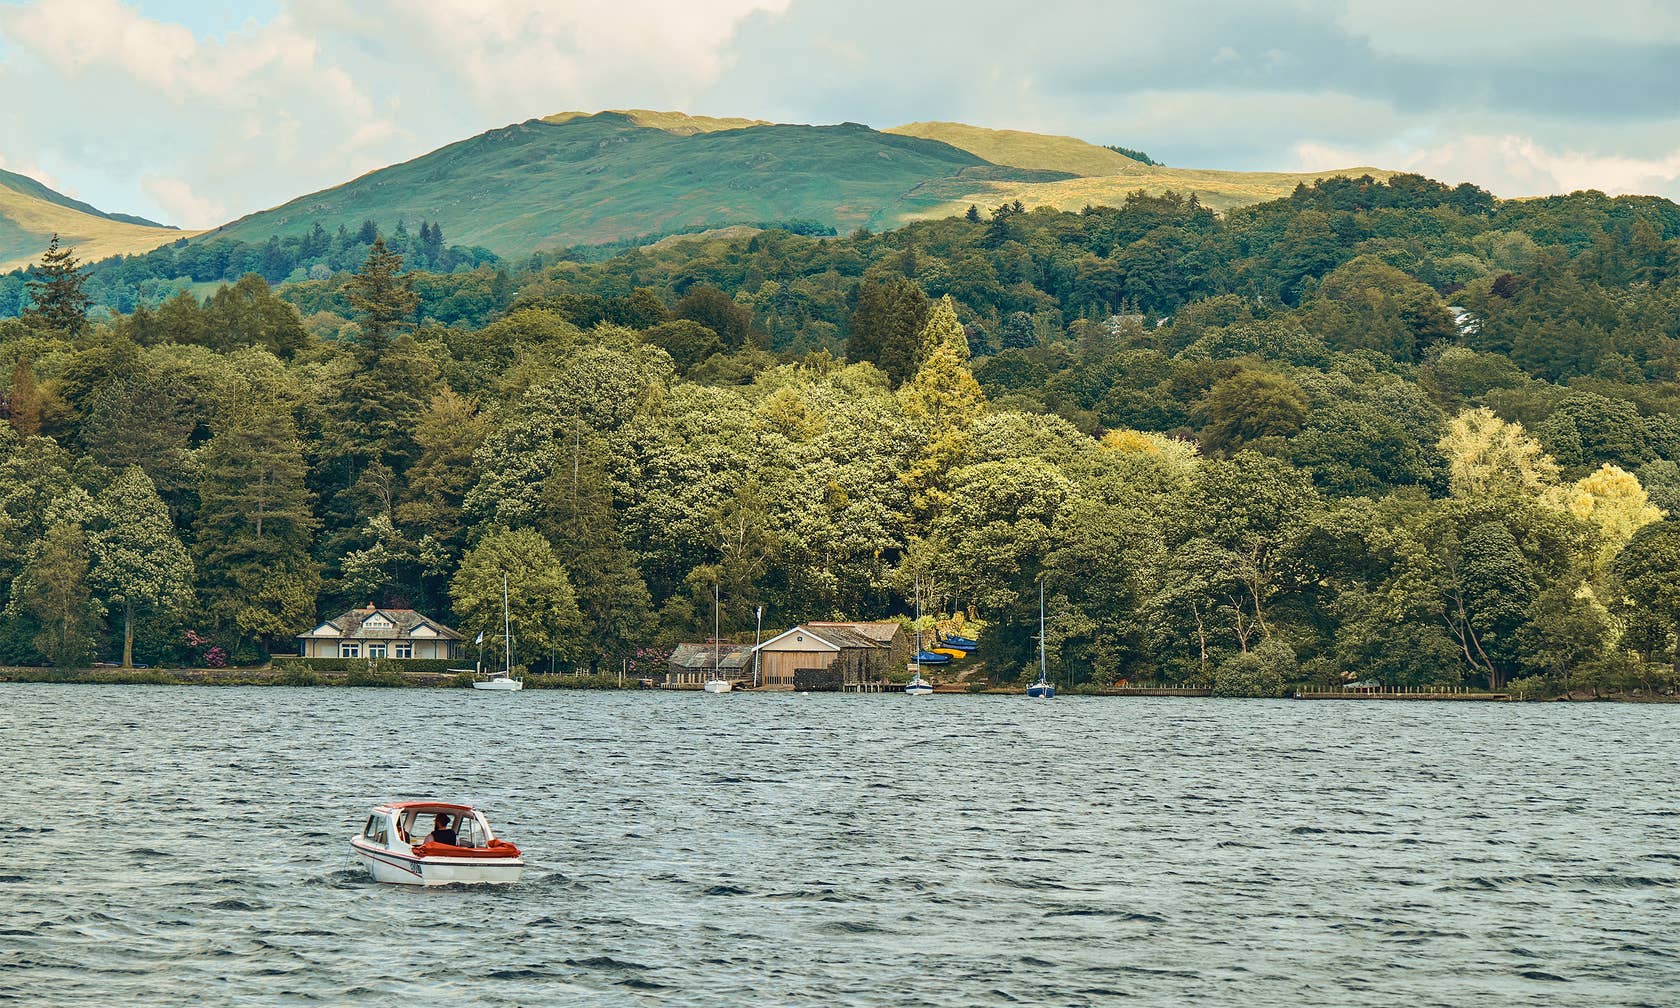 Holiday rentals in Bowness-on-Windermere